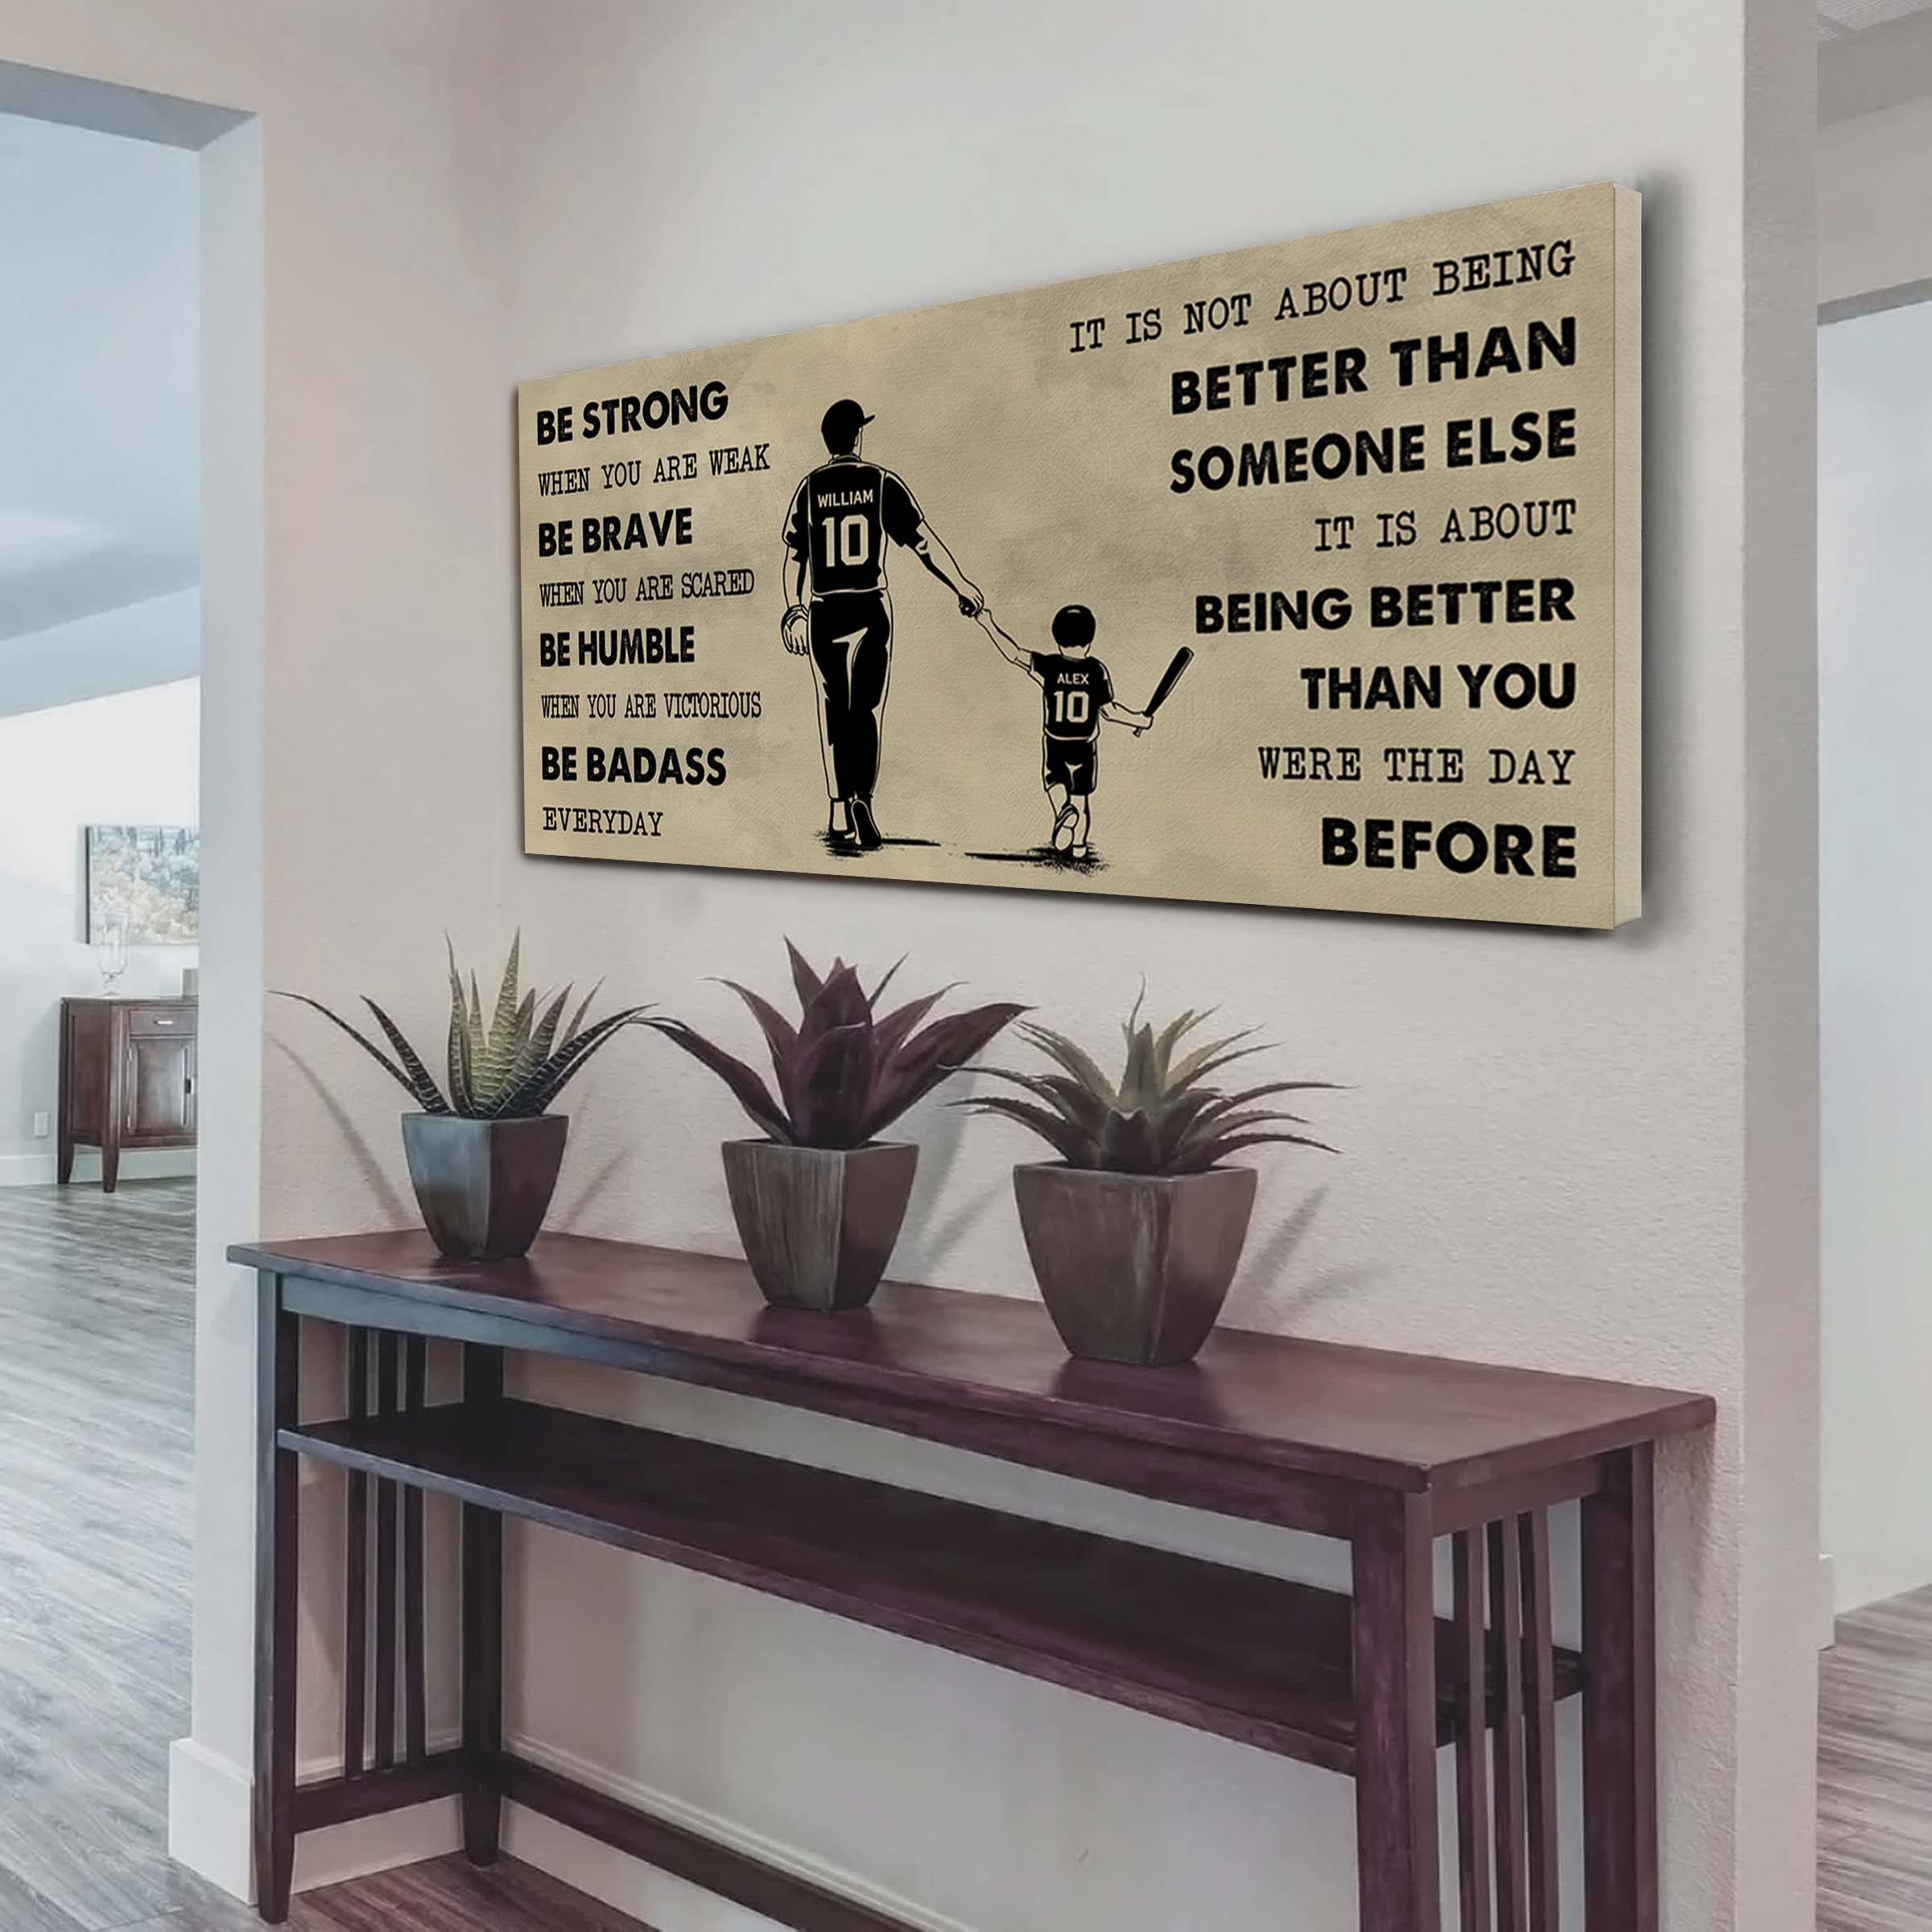 Basketball Poster Canvas From Dad To Son Be Strong When You Are Weak - It Is Not About Being Better Than Someone Else